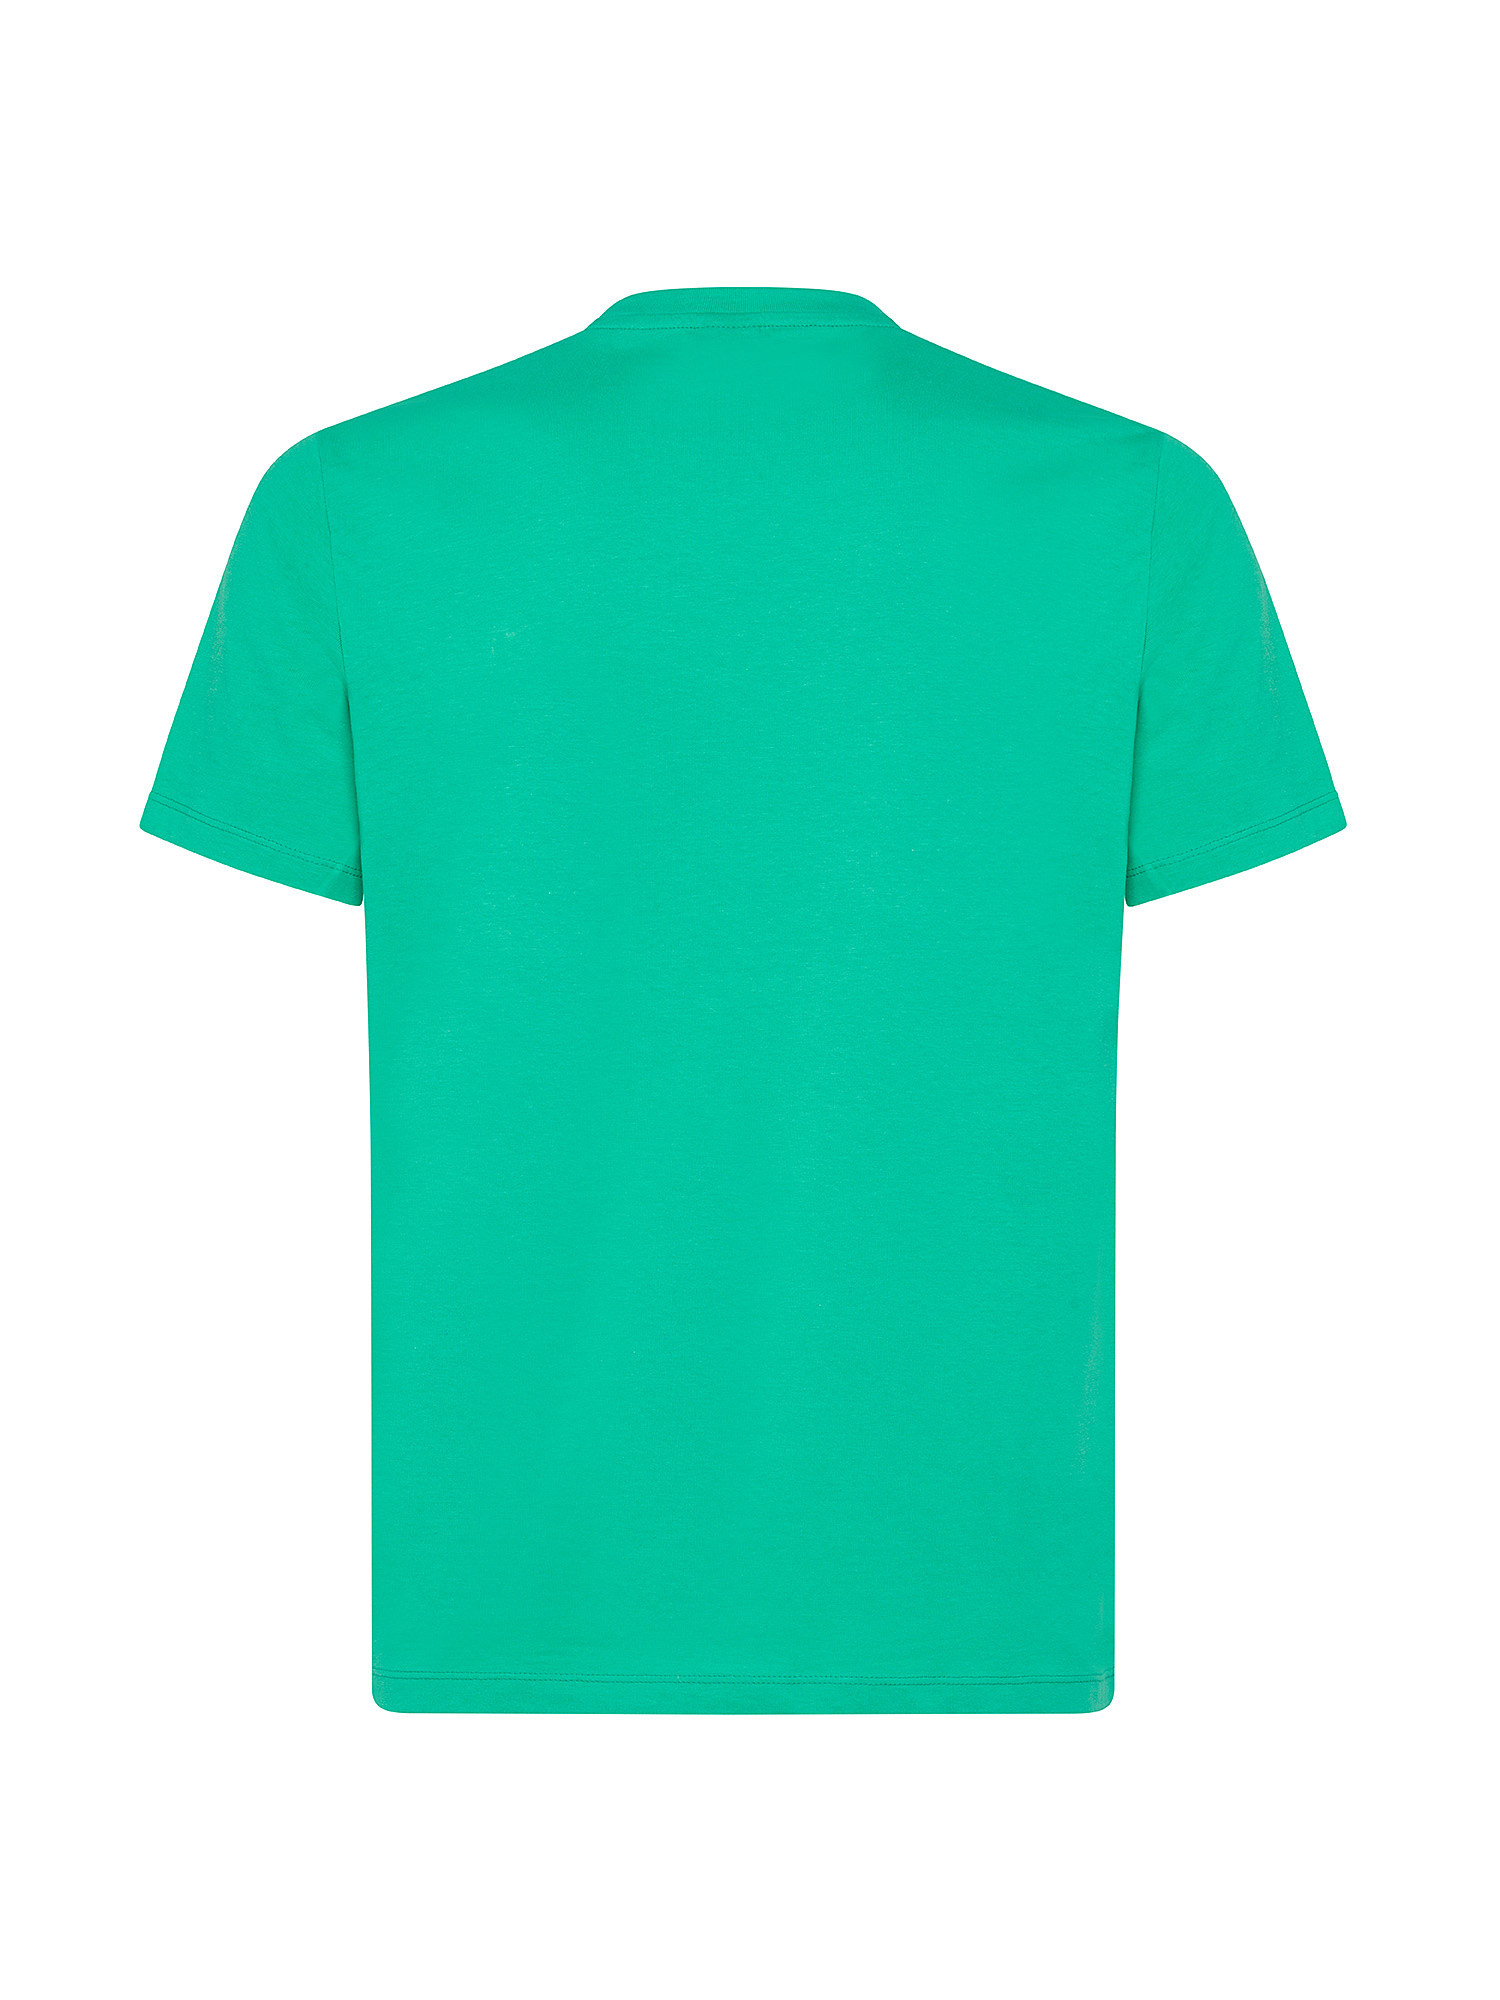 North Sails - T-shirt in jersey di cotone organico con micrologo, Verde, large image number 1